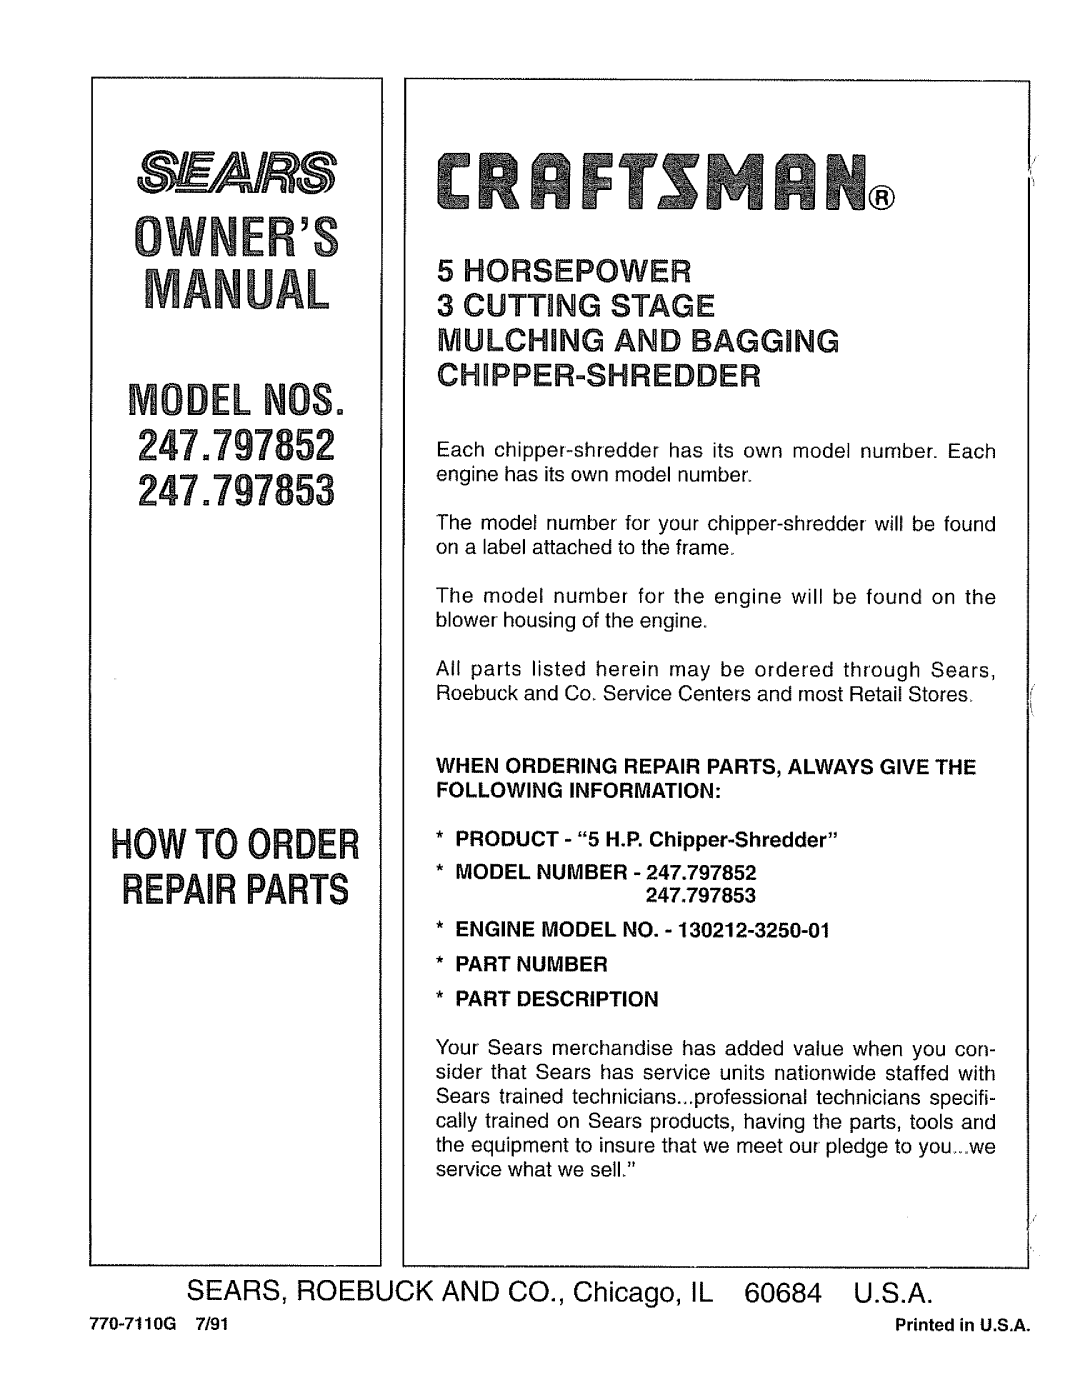 Craftsman 247.797853, 247.797852 manual HORSEPOWER 3 CUTTING STAGE MULCHING AND BAGGaNG, Chbpper-Shredder, Owners, Manual 